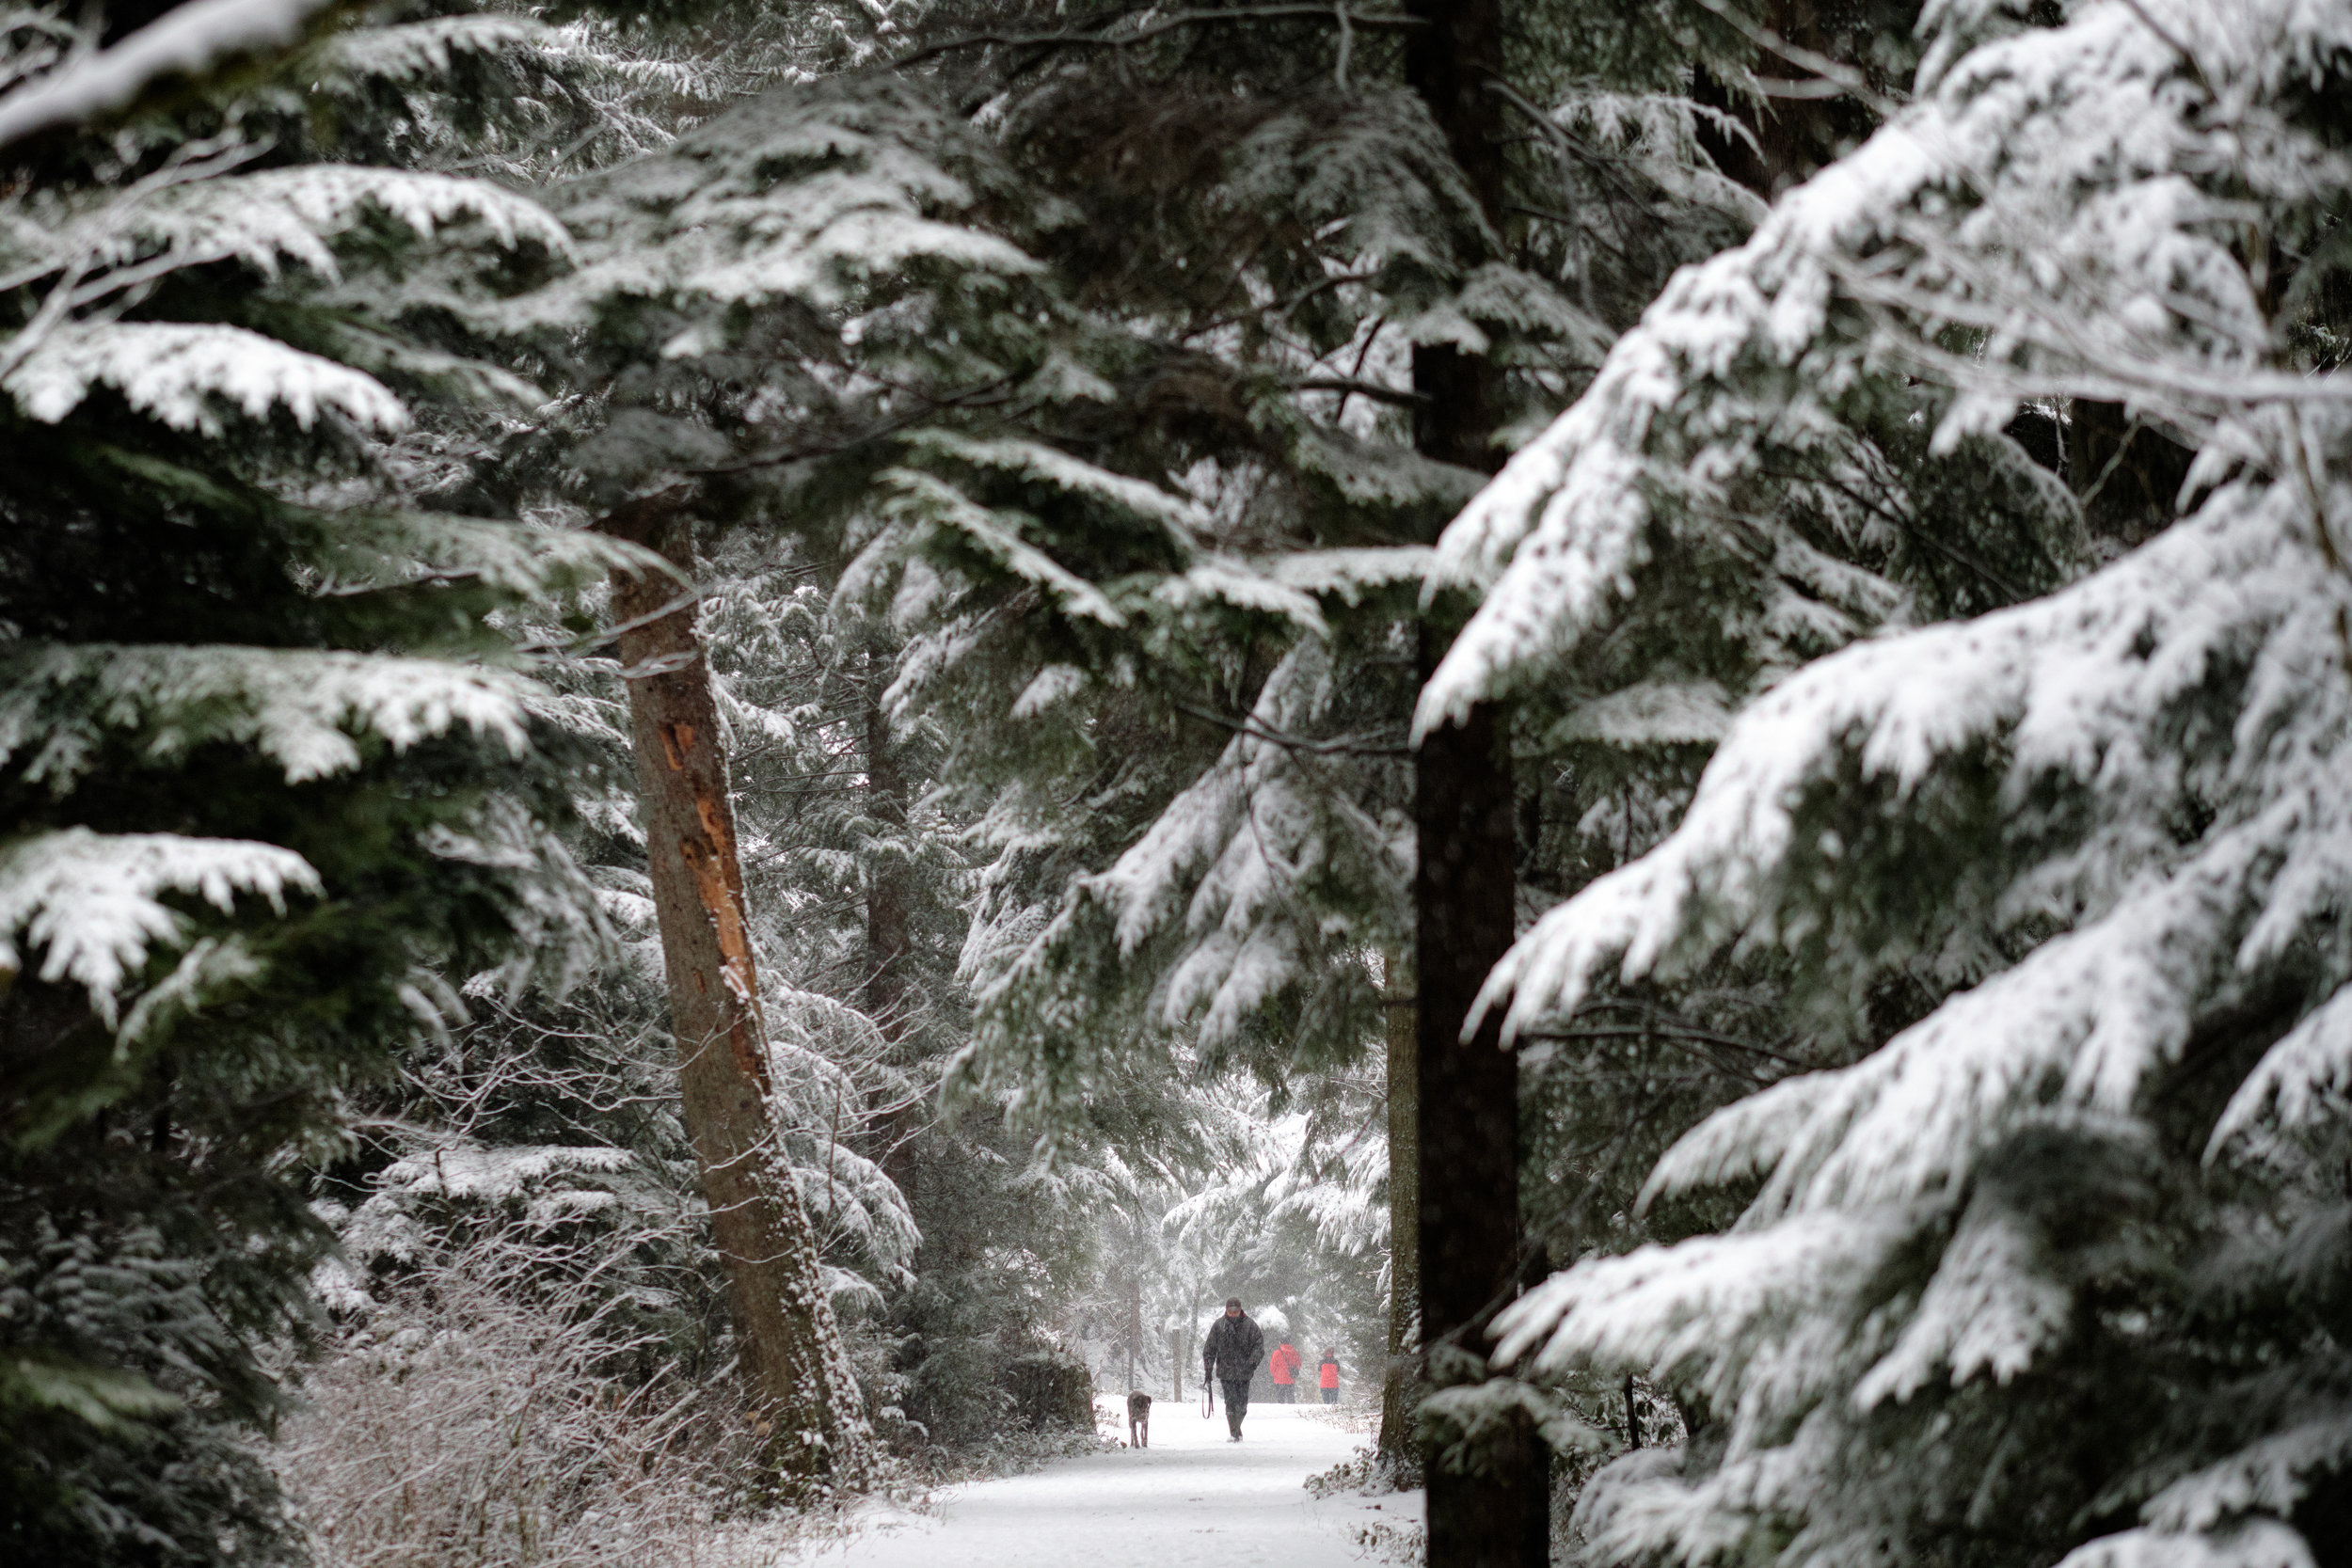 A man walks his dog in Stanley Park during a snow storm on February